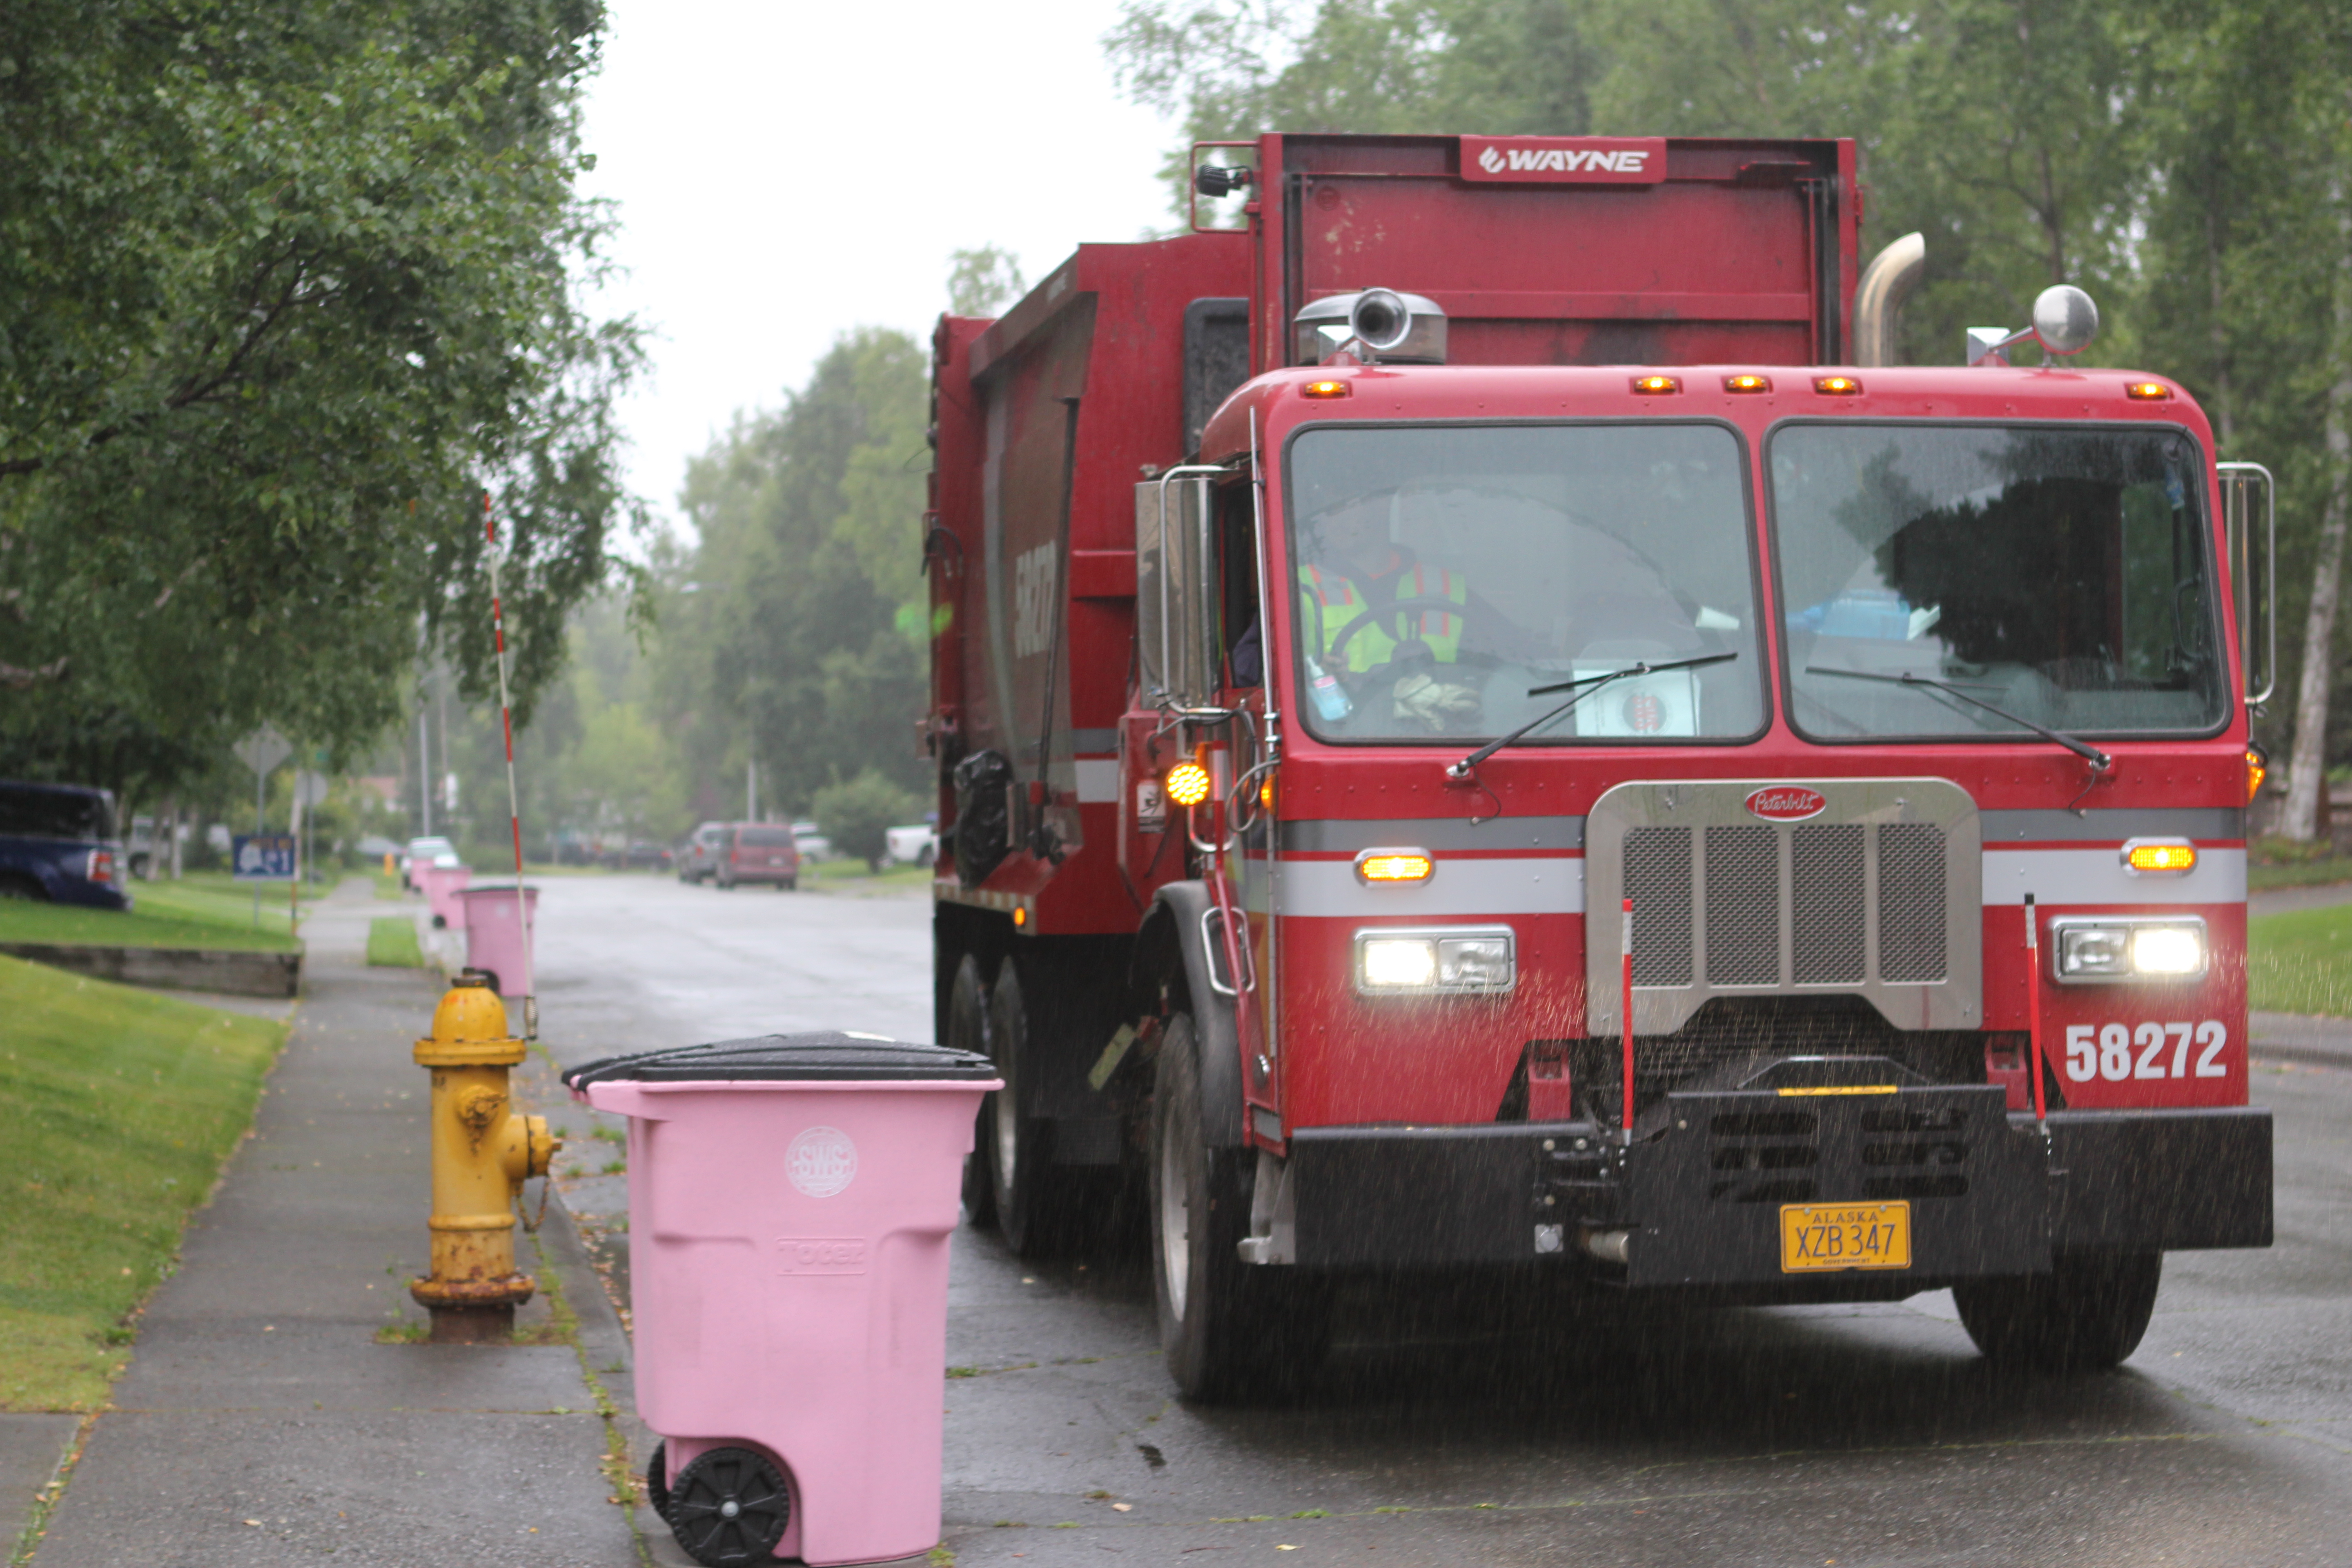 A red trash truck next to a pink trash can on an overcast day